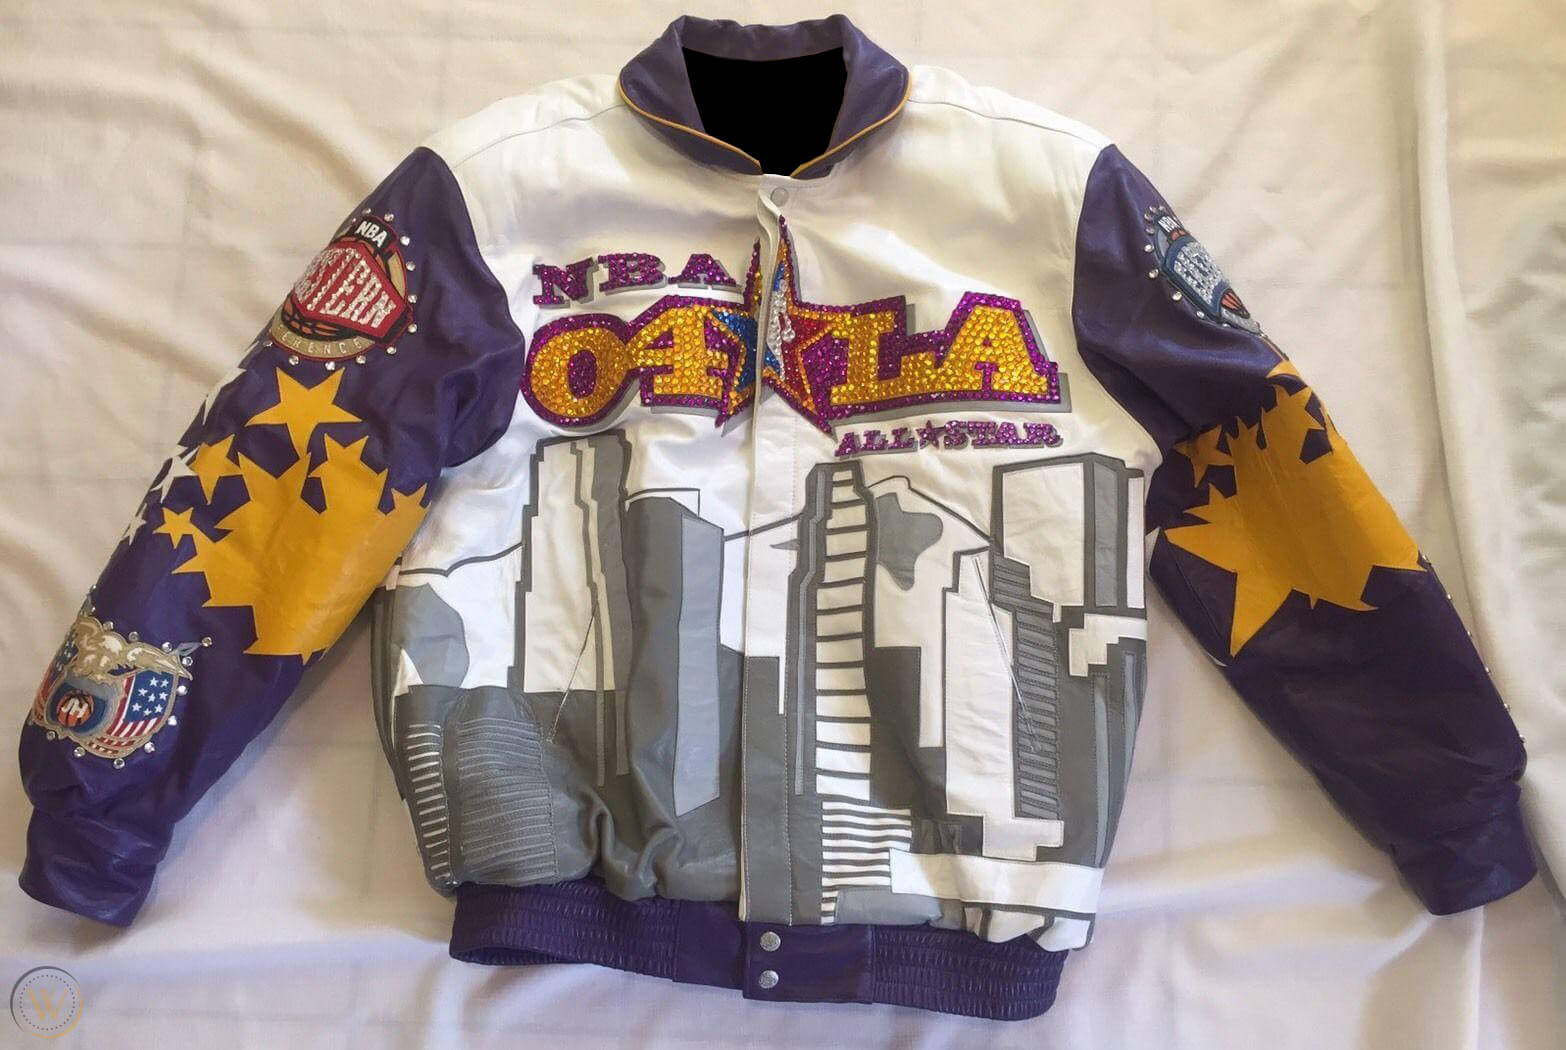 Maker of Jacket Fashion Jackets NBA All Star 2004 Los Angeles Lakers Leather